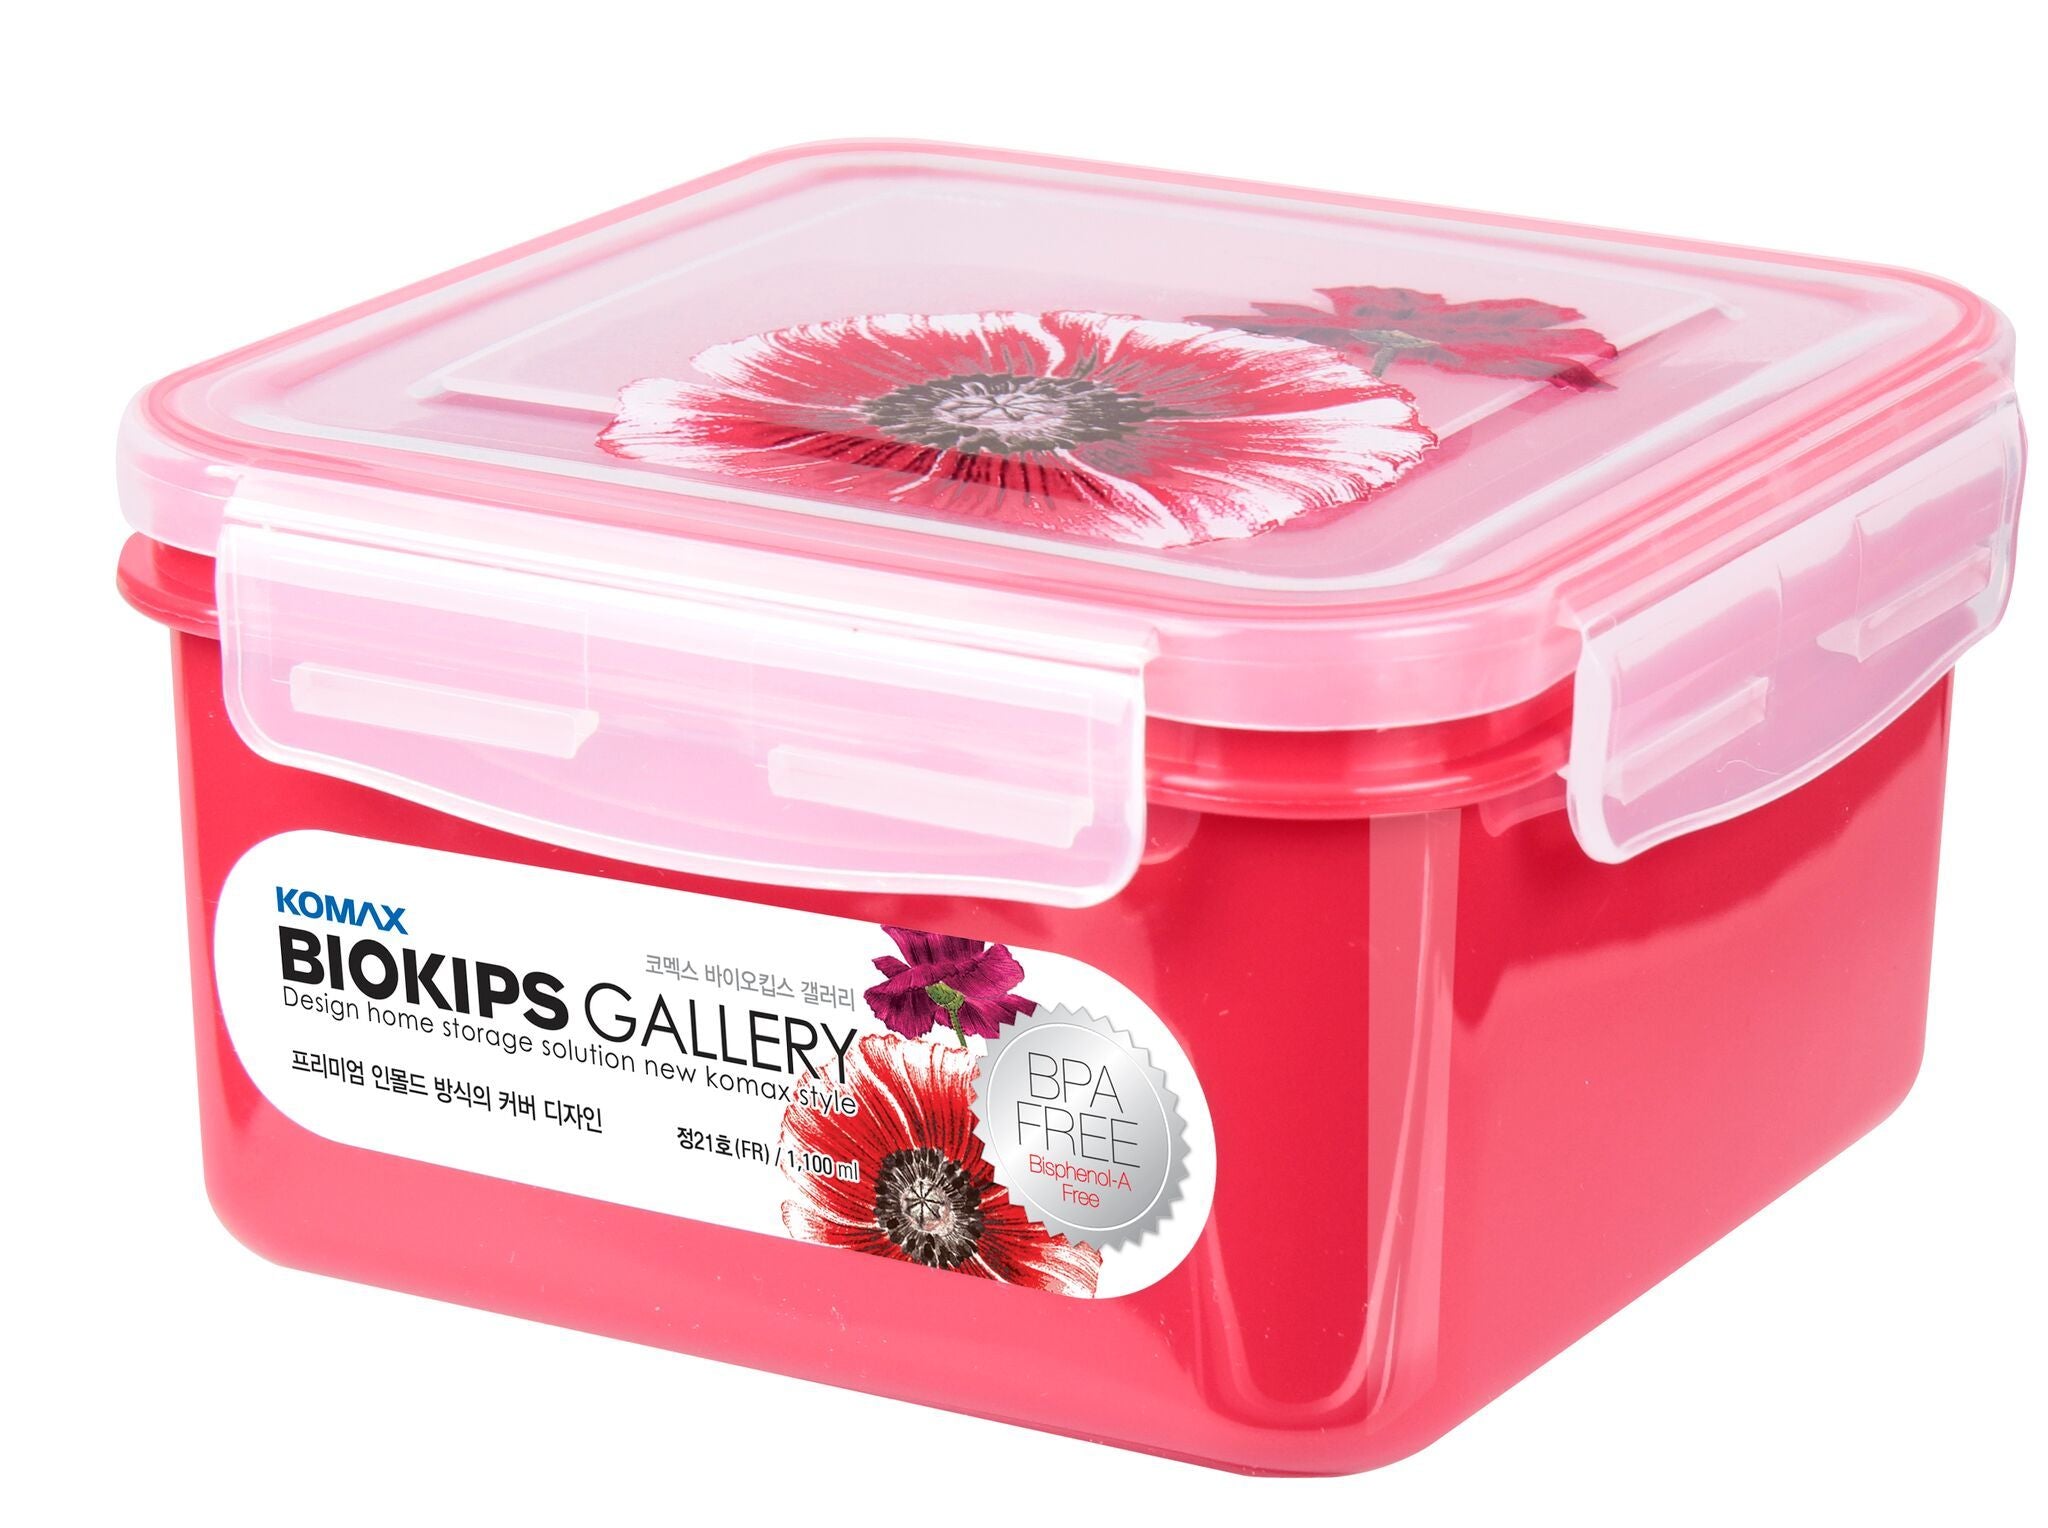 Komax Biokips Gallery I Square Food Storage Container, 1.1 L